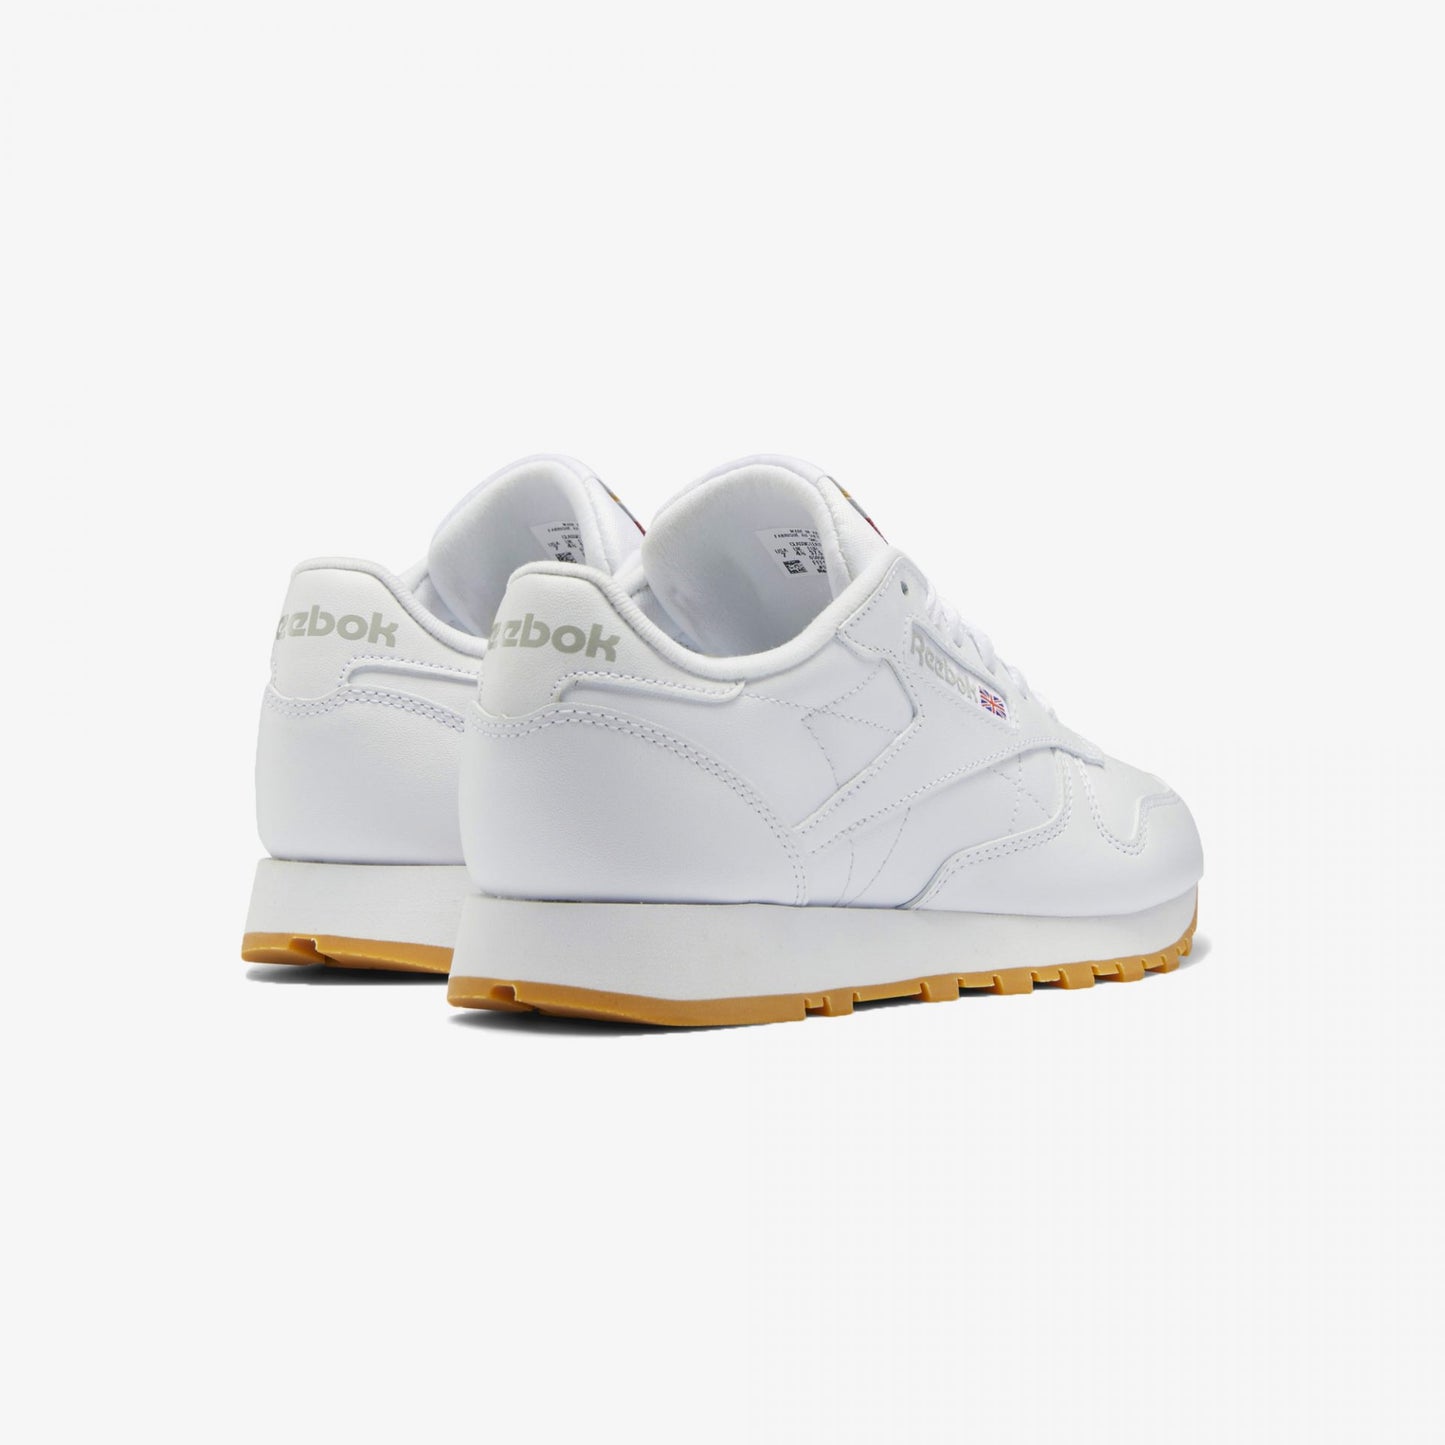 WMN'S CLASSIC LEATHER 'PURE GREY 3 / REEBOK RUBBER GUM-03'